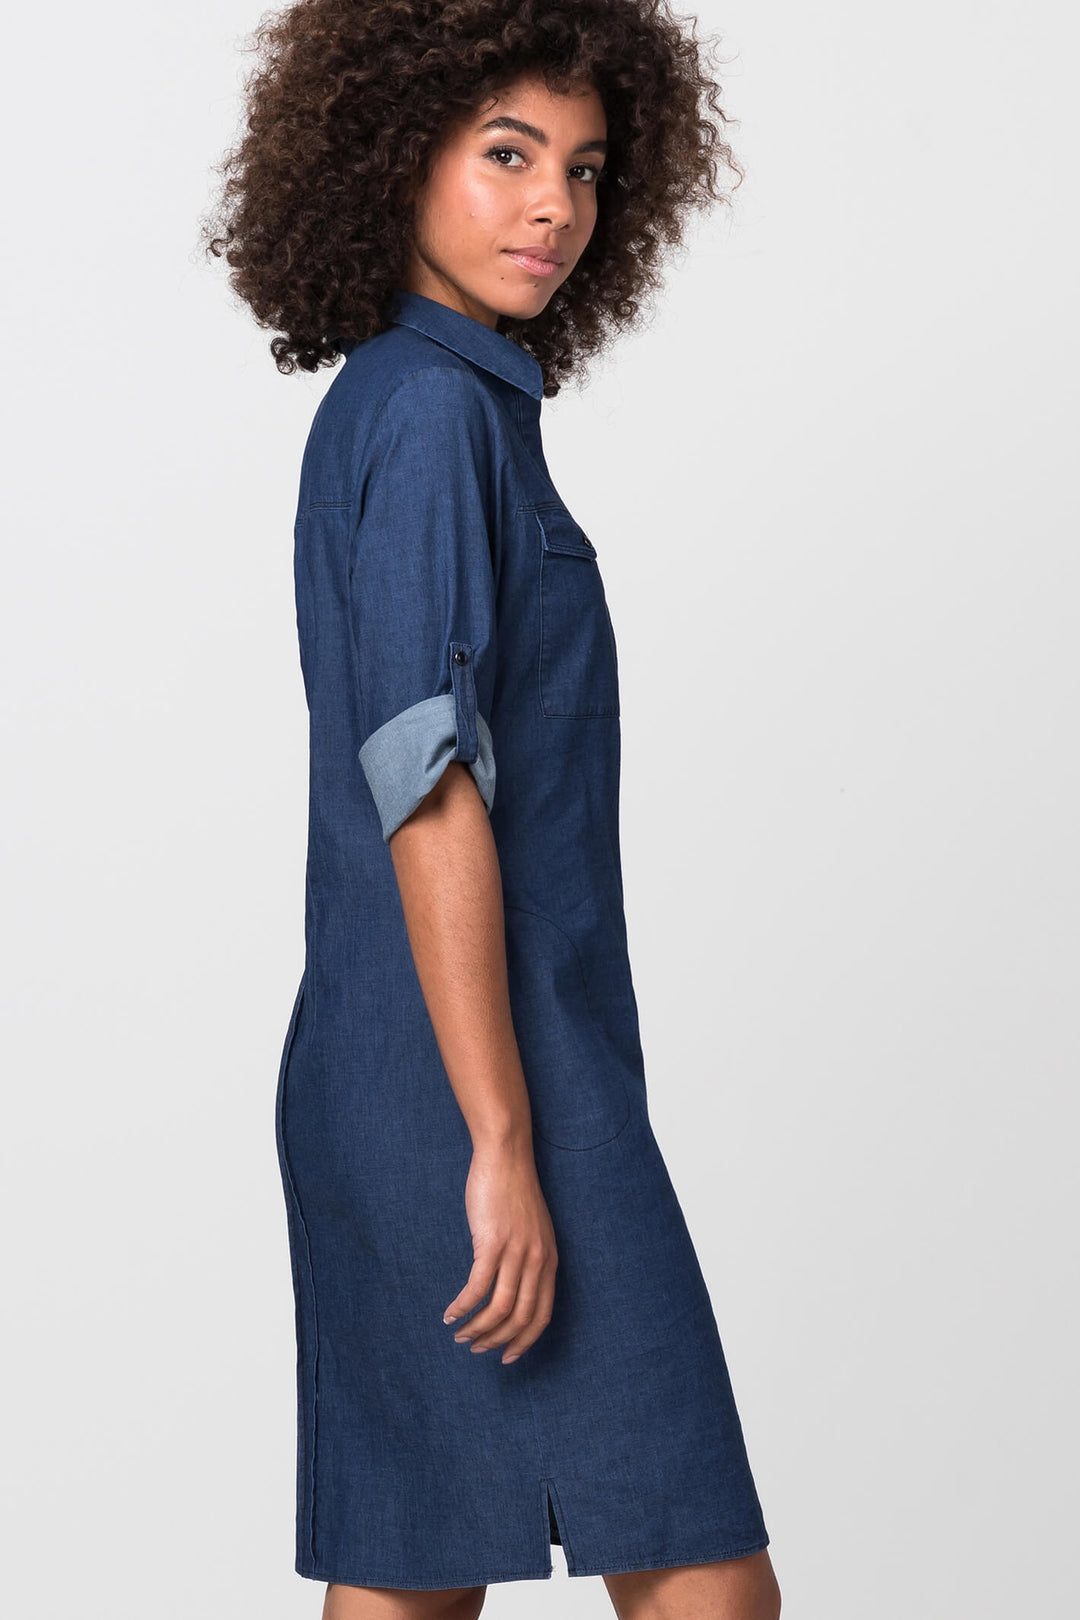 Bianca 87001 Alis Blue Denim Dress With Roll Up Sleeves - Shirley Allum Boutique